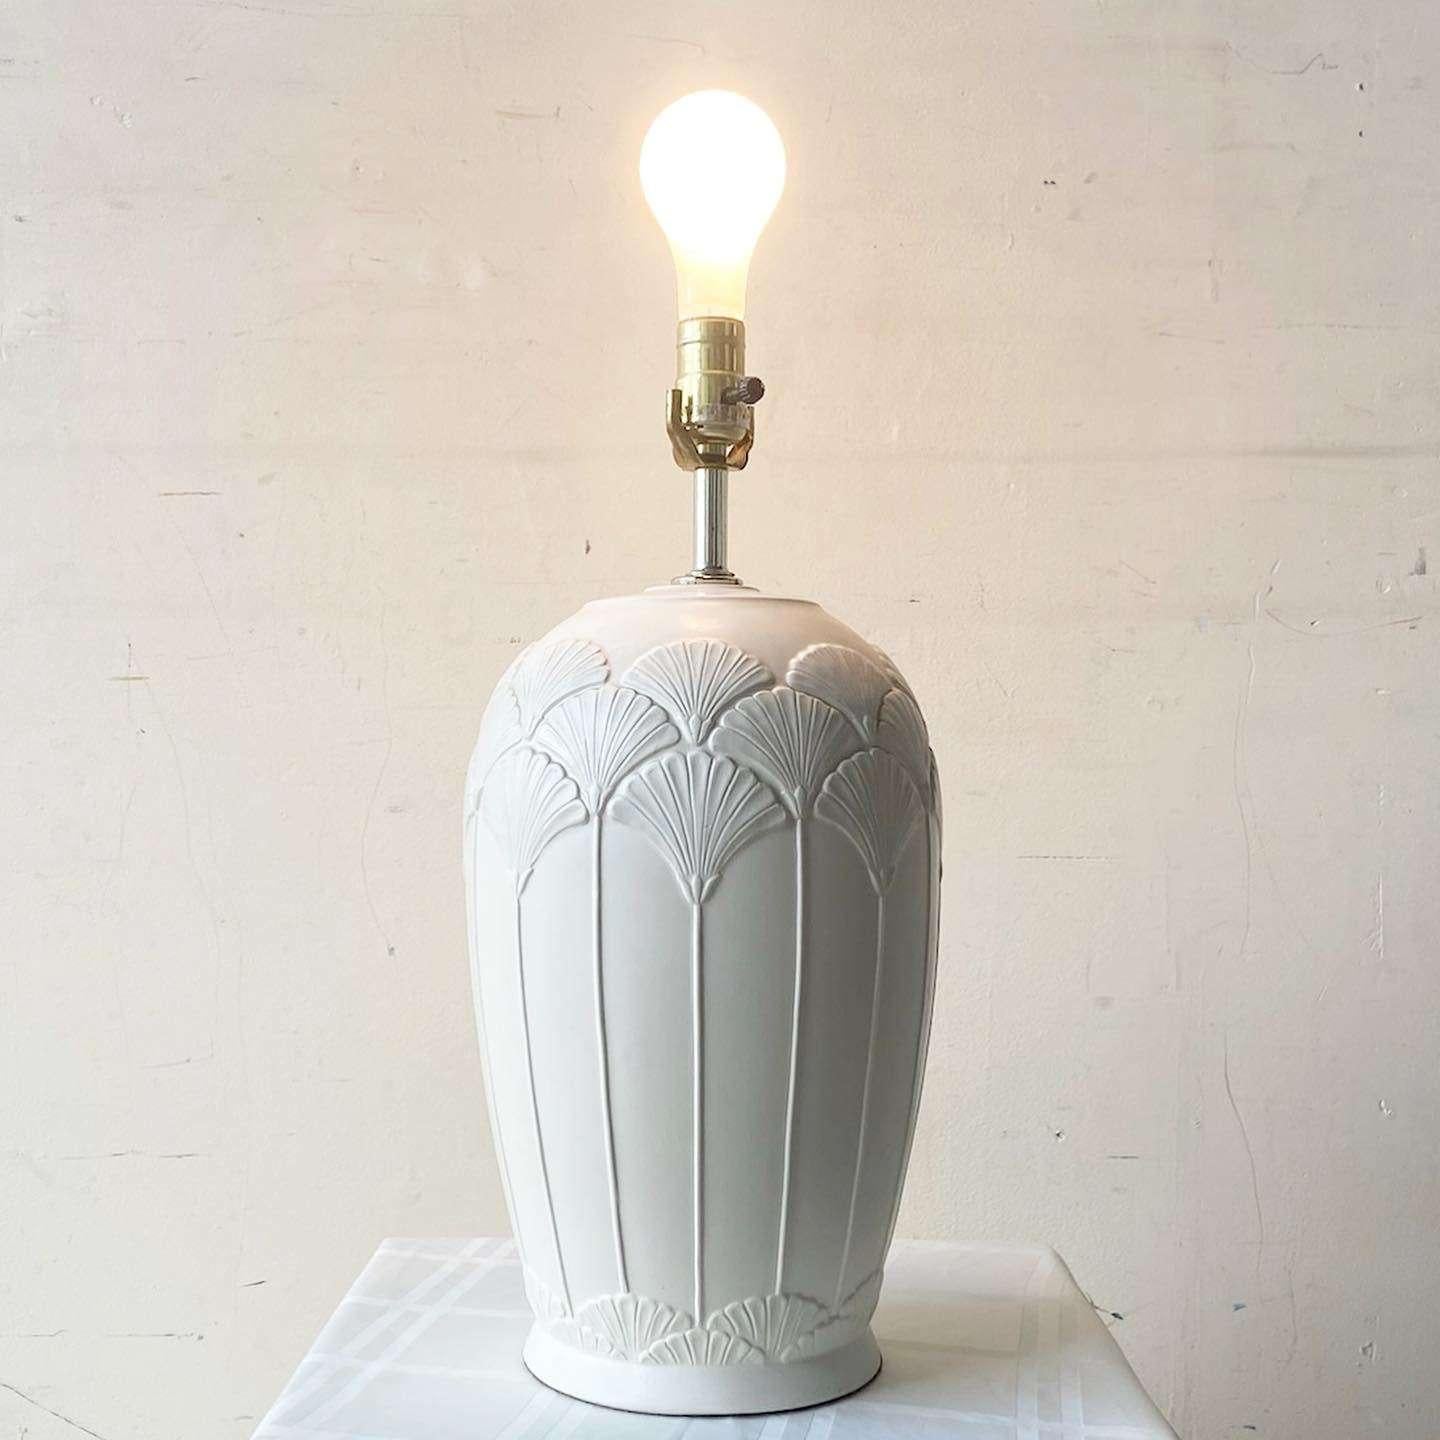 Amazing vintage postmodern ceramic table lamp. Features etched flowers around the body of the lamp with a beige finish.
